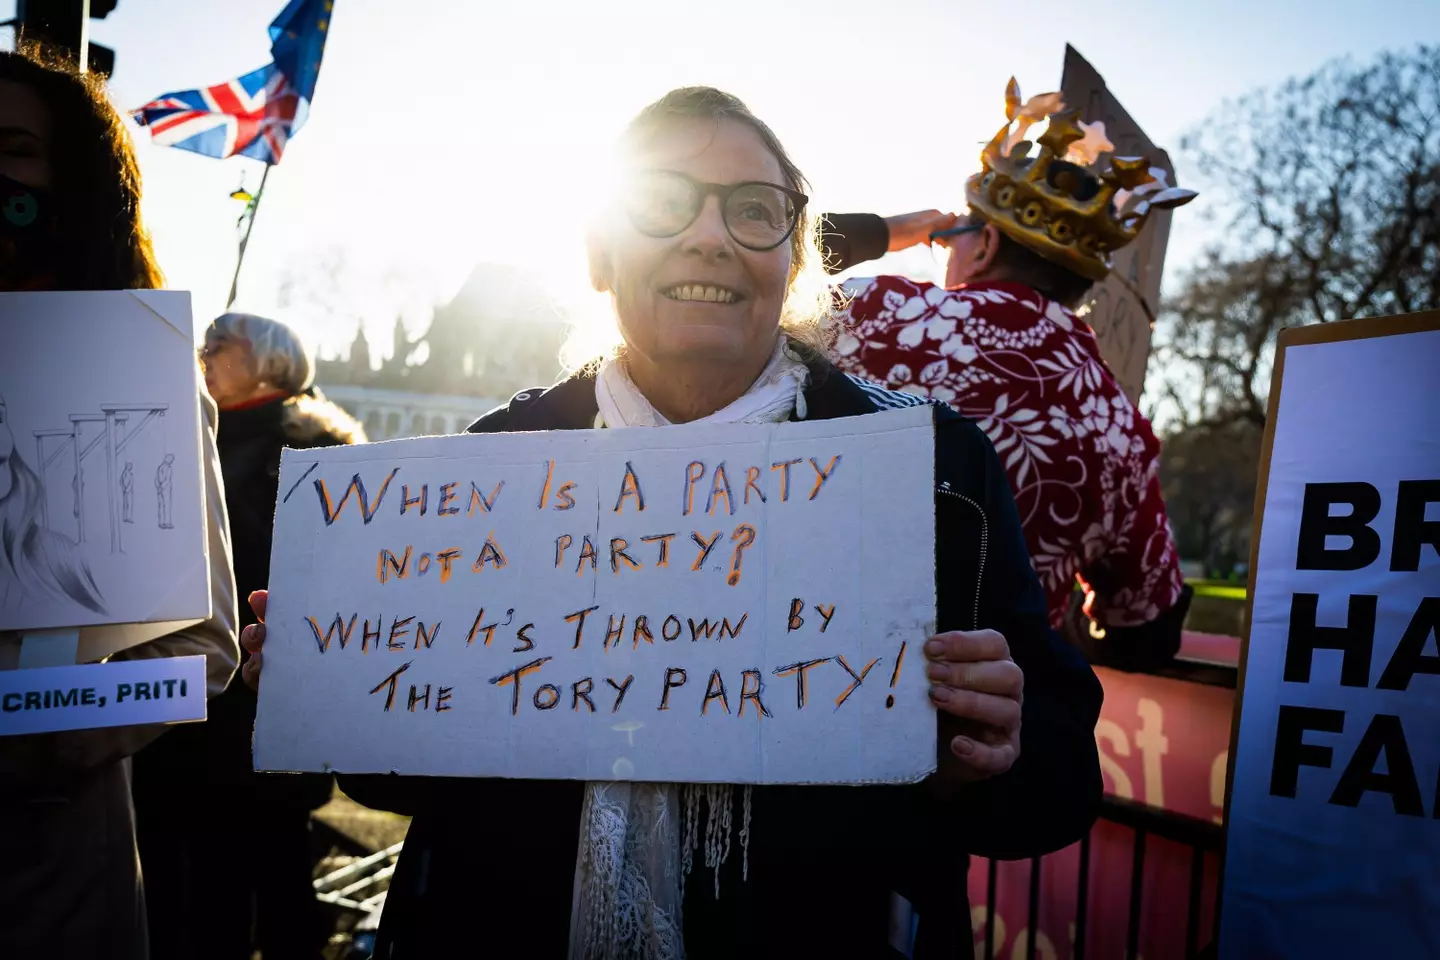 A protester holding a sign about the Number 10 party in May 2020.